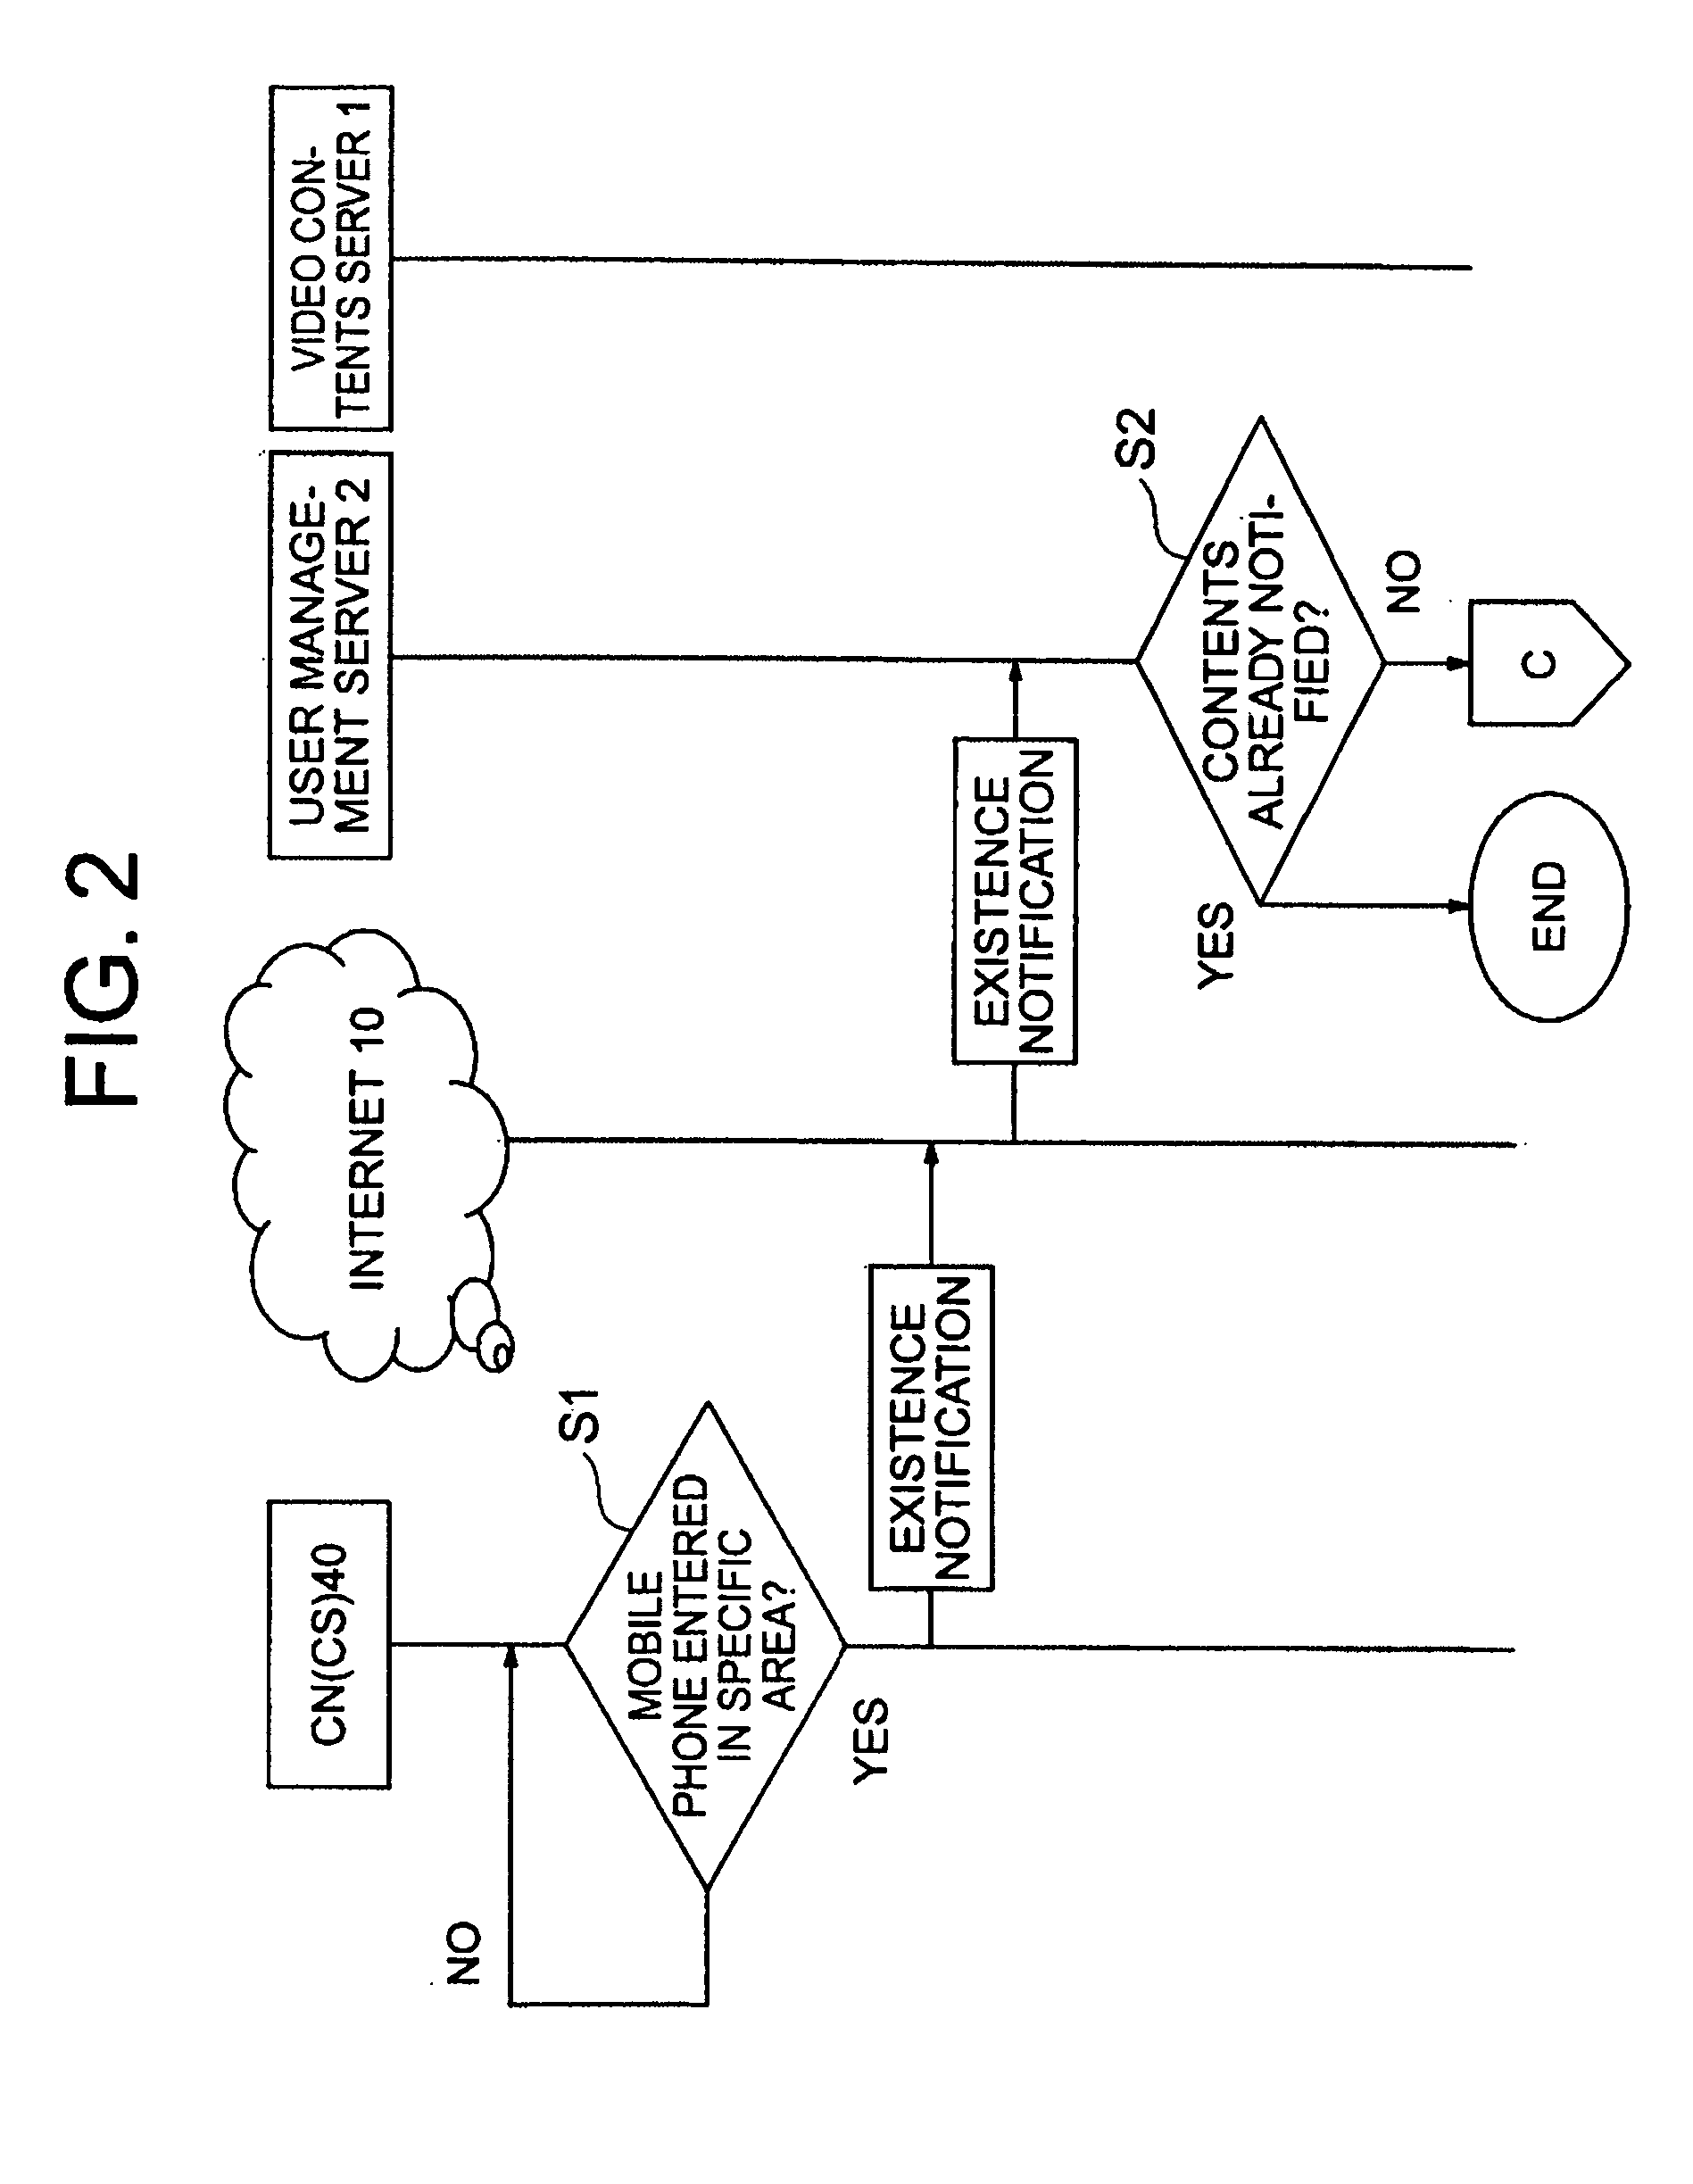 Method for distributing video information to mobile phone based on push technology